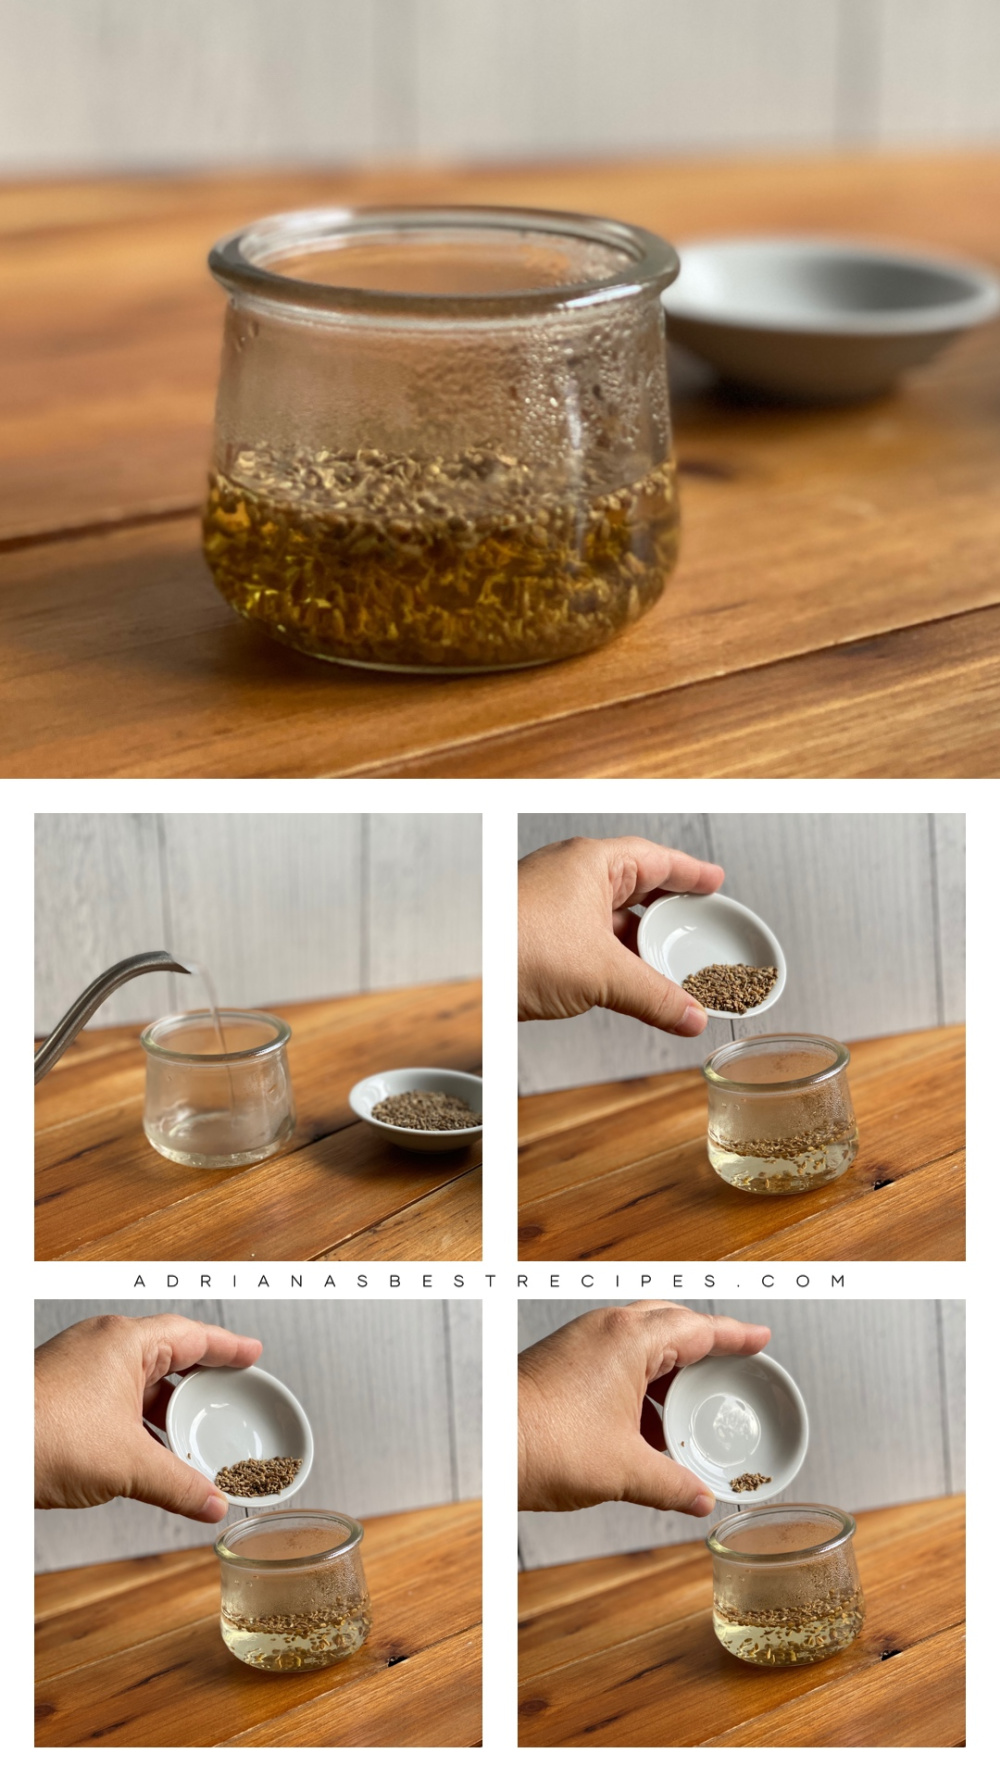 Showing the process on how to soak the anise seeds